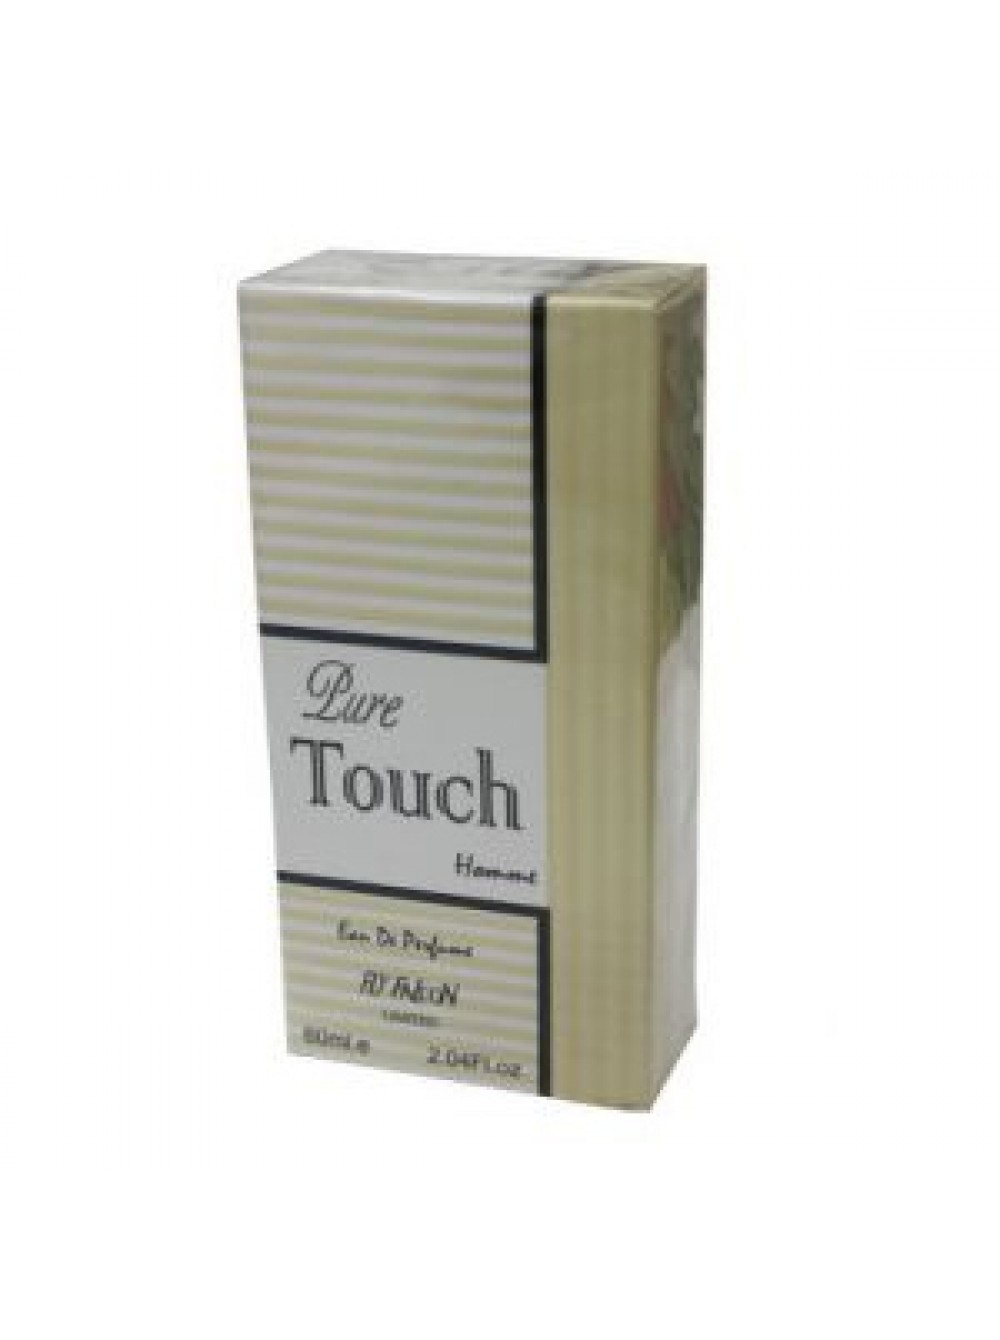 FLY FALCONE PURE TOUCH HOMME